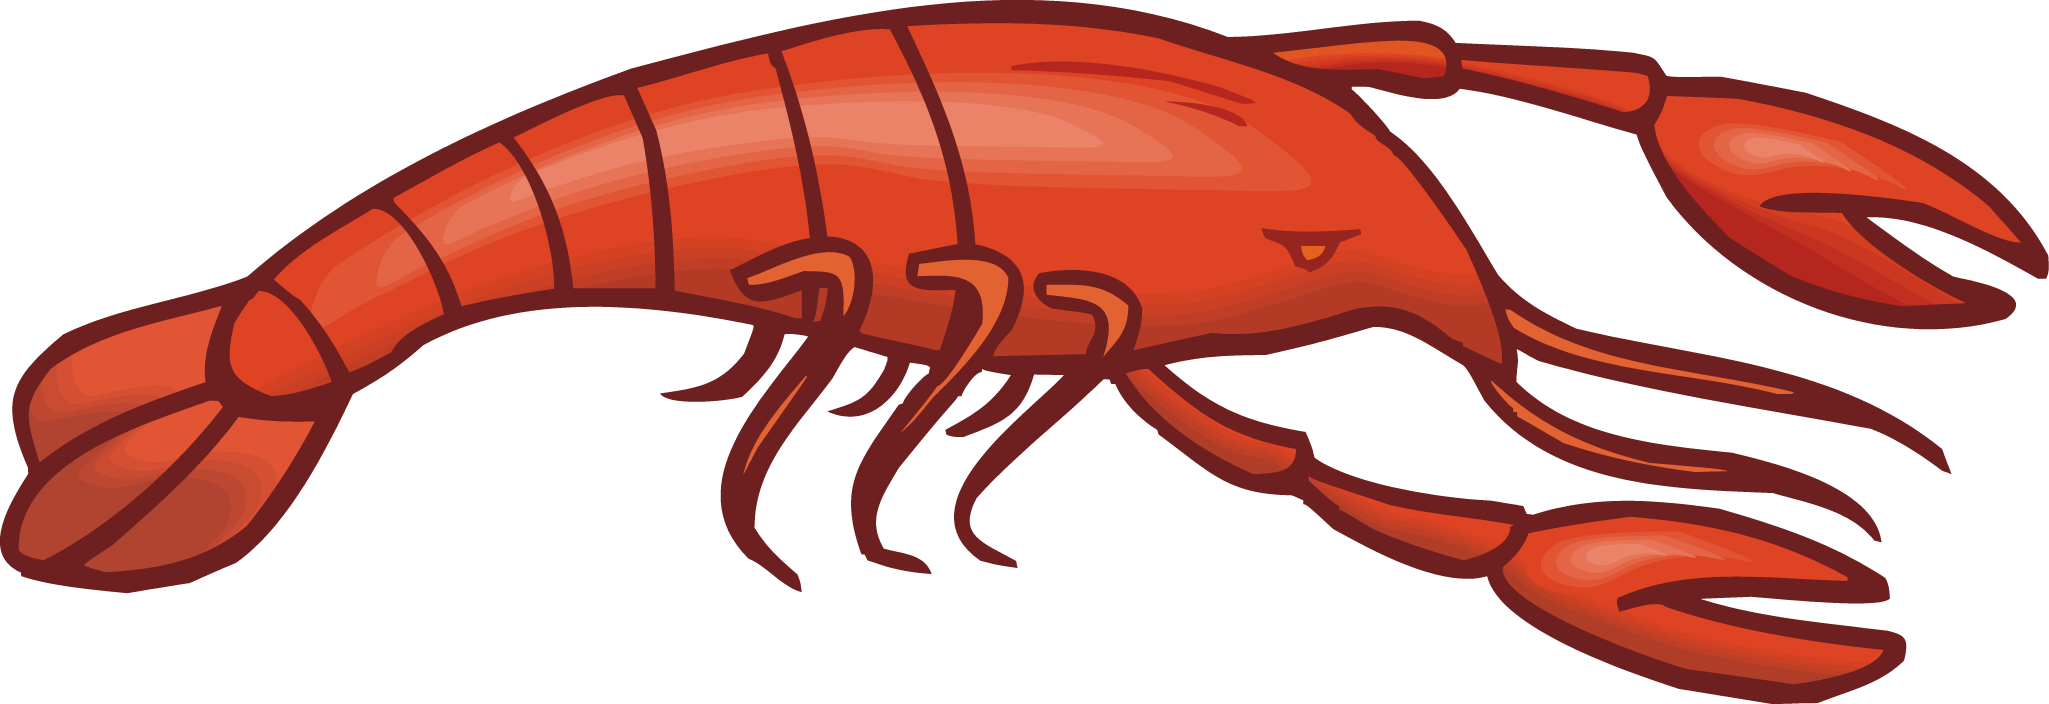 19 Pictures Of Crawfish Free Cliparts That You Can Download To You    